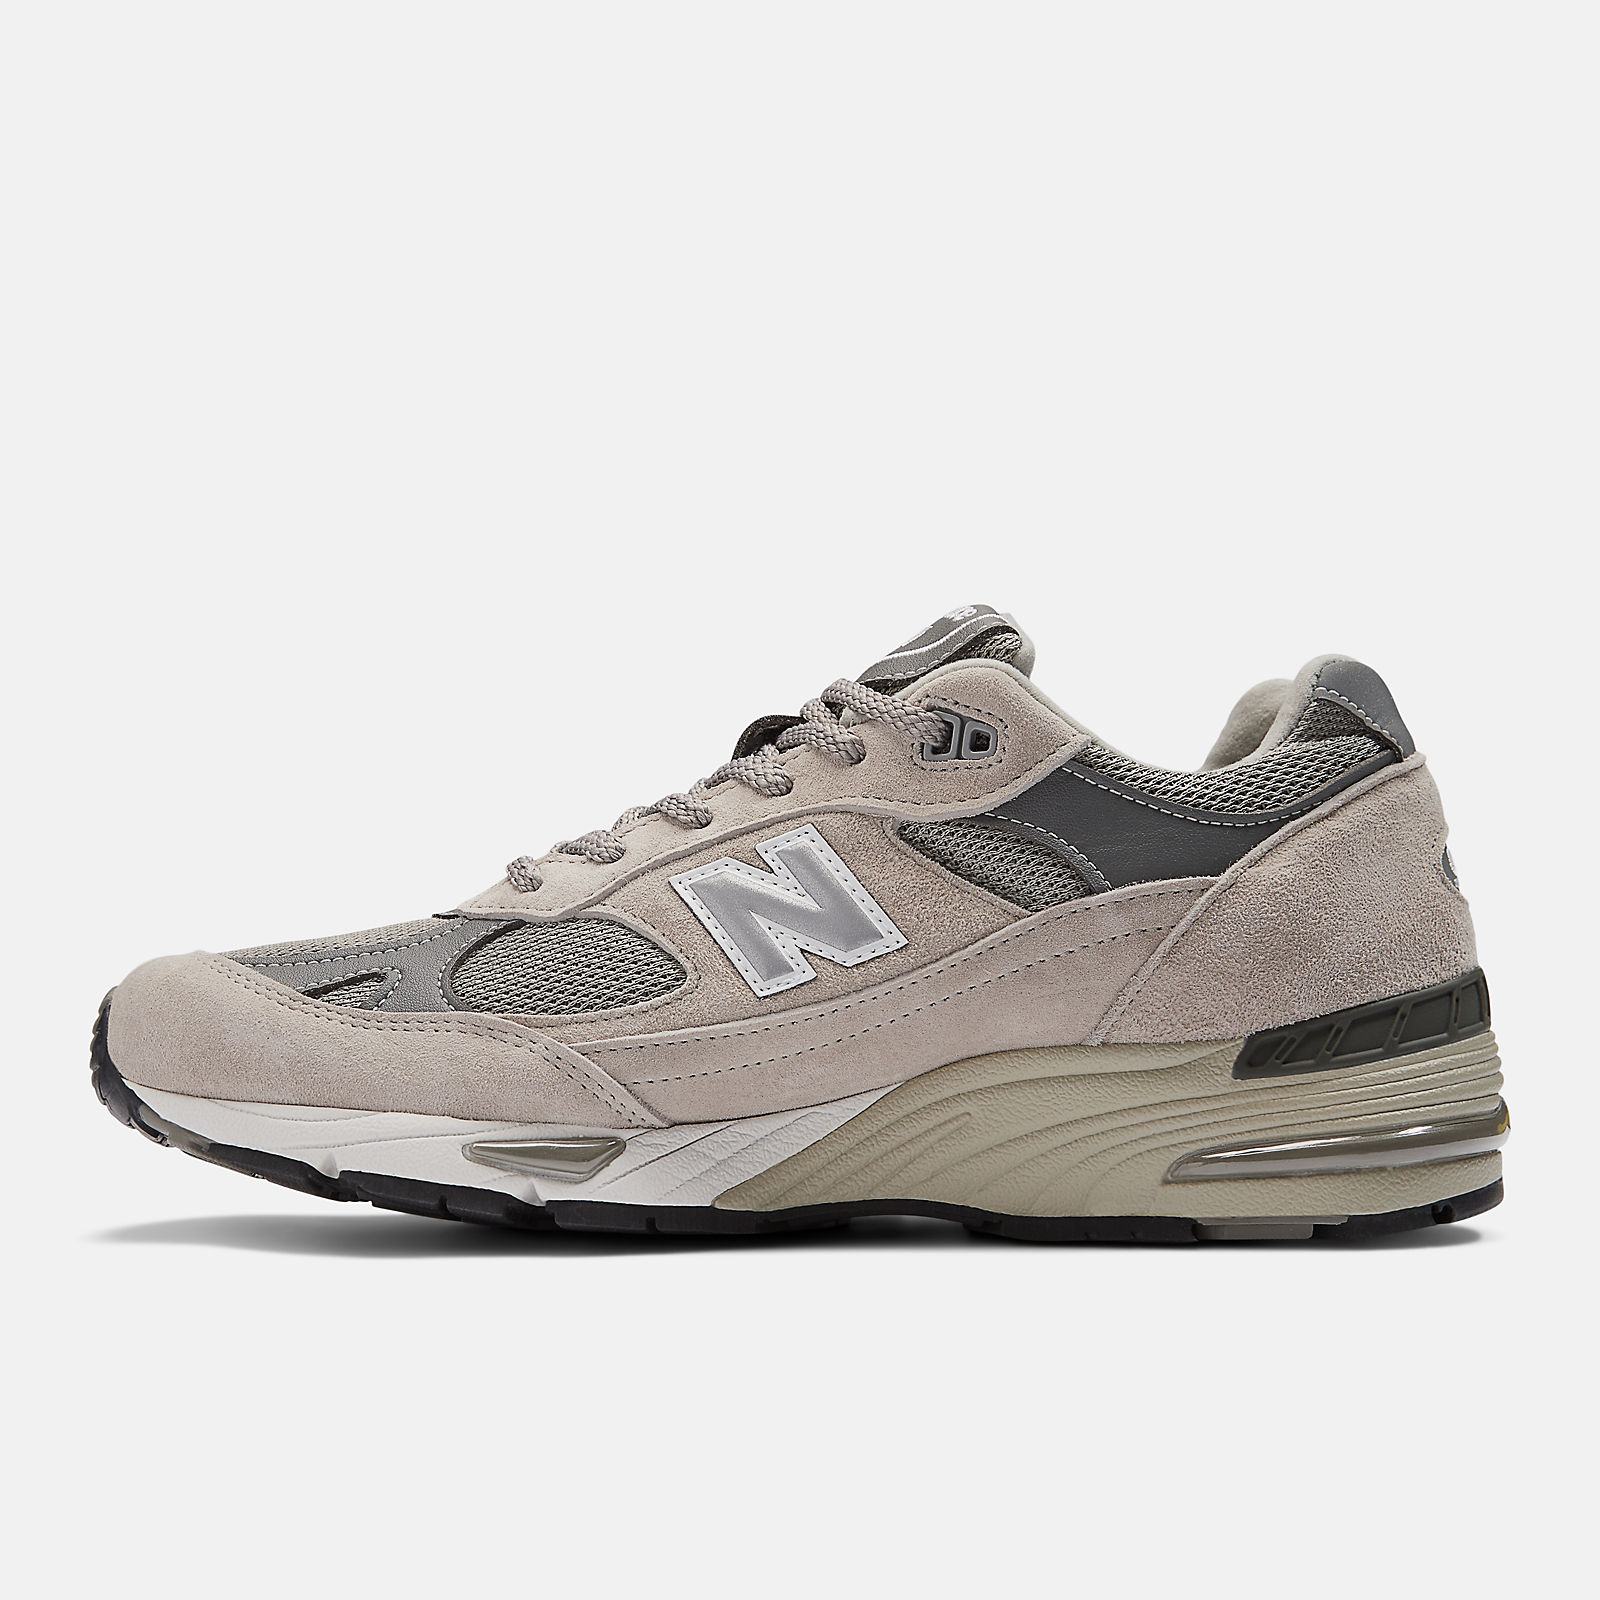 chat Barter flood Made in the UK 991 - New Balance